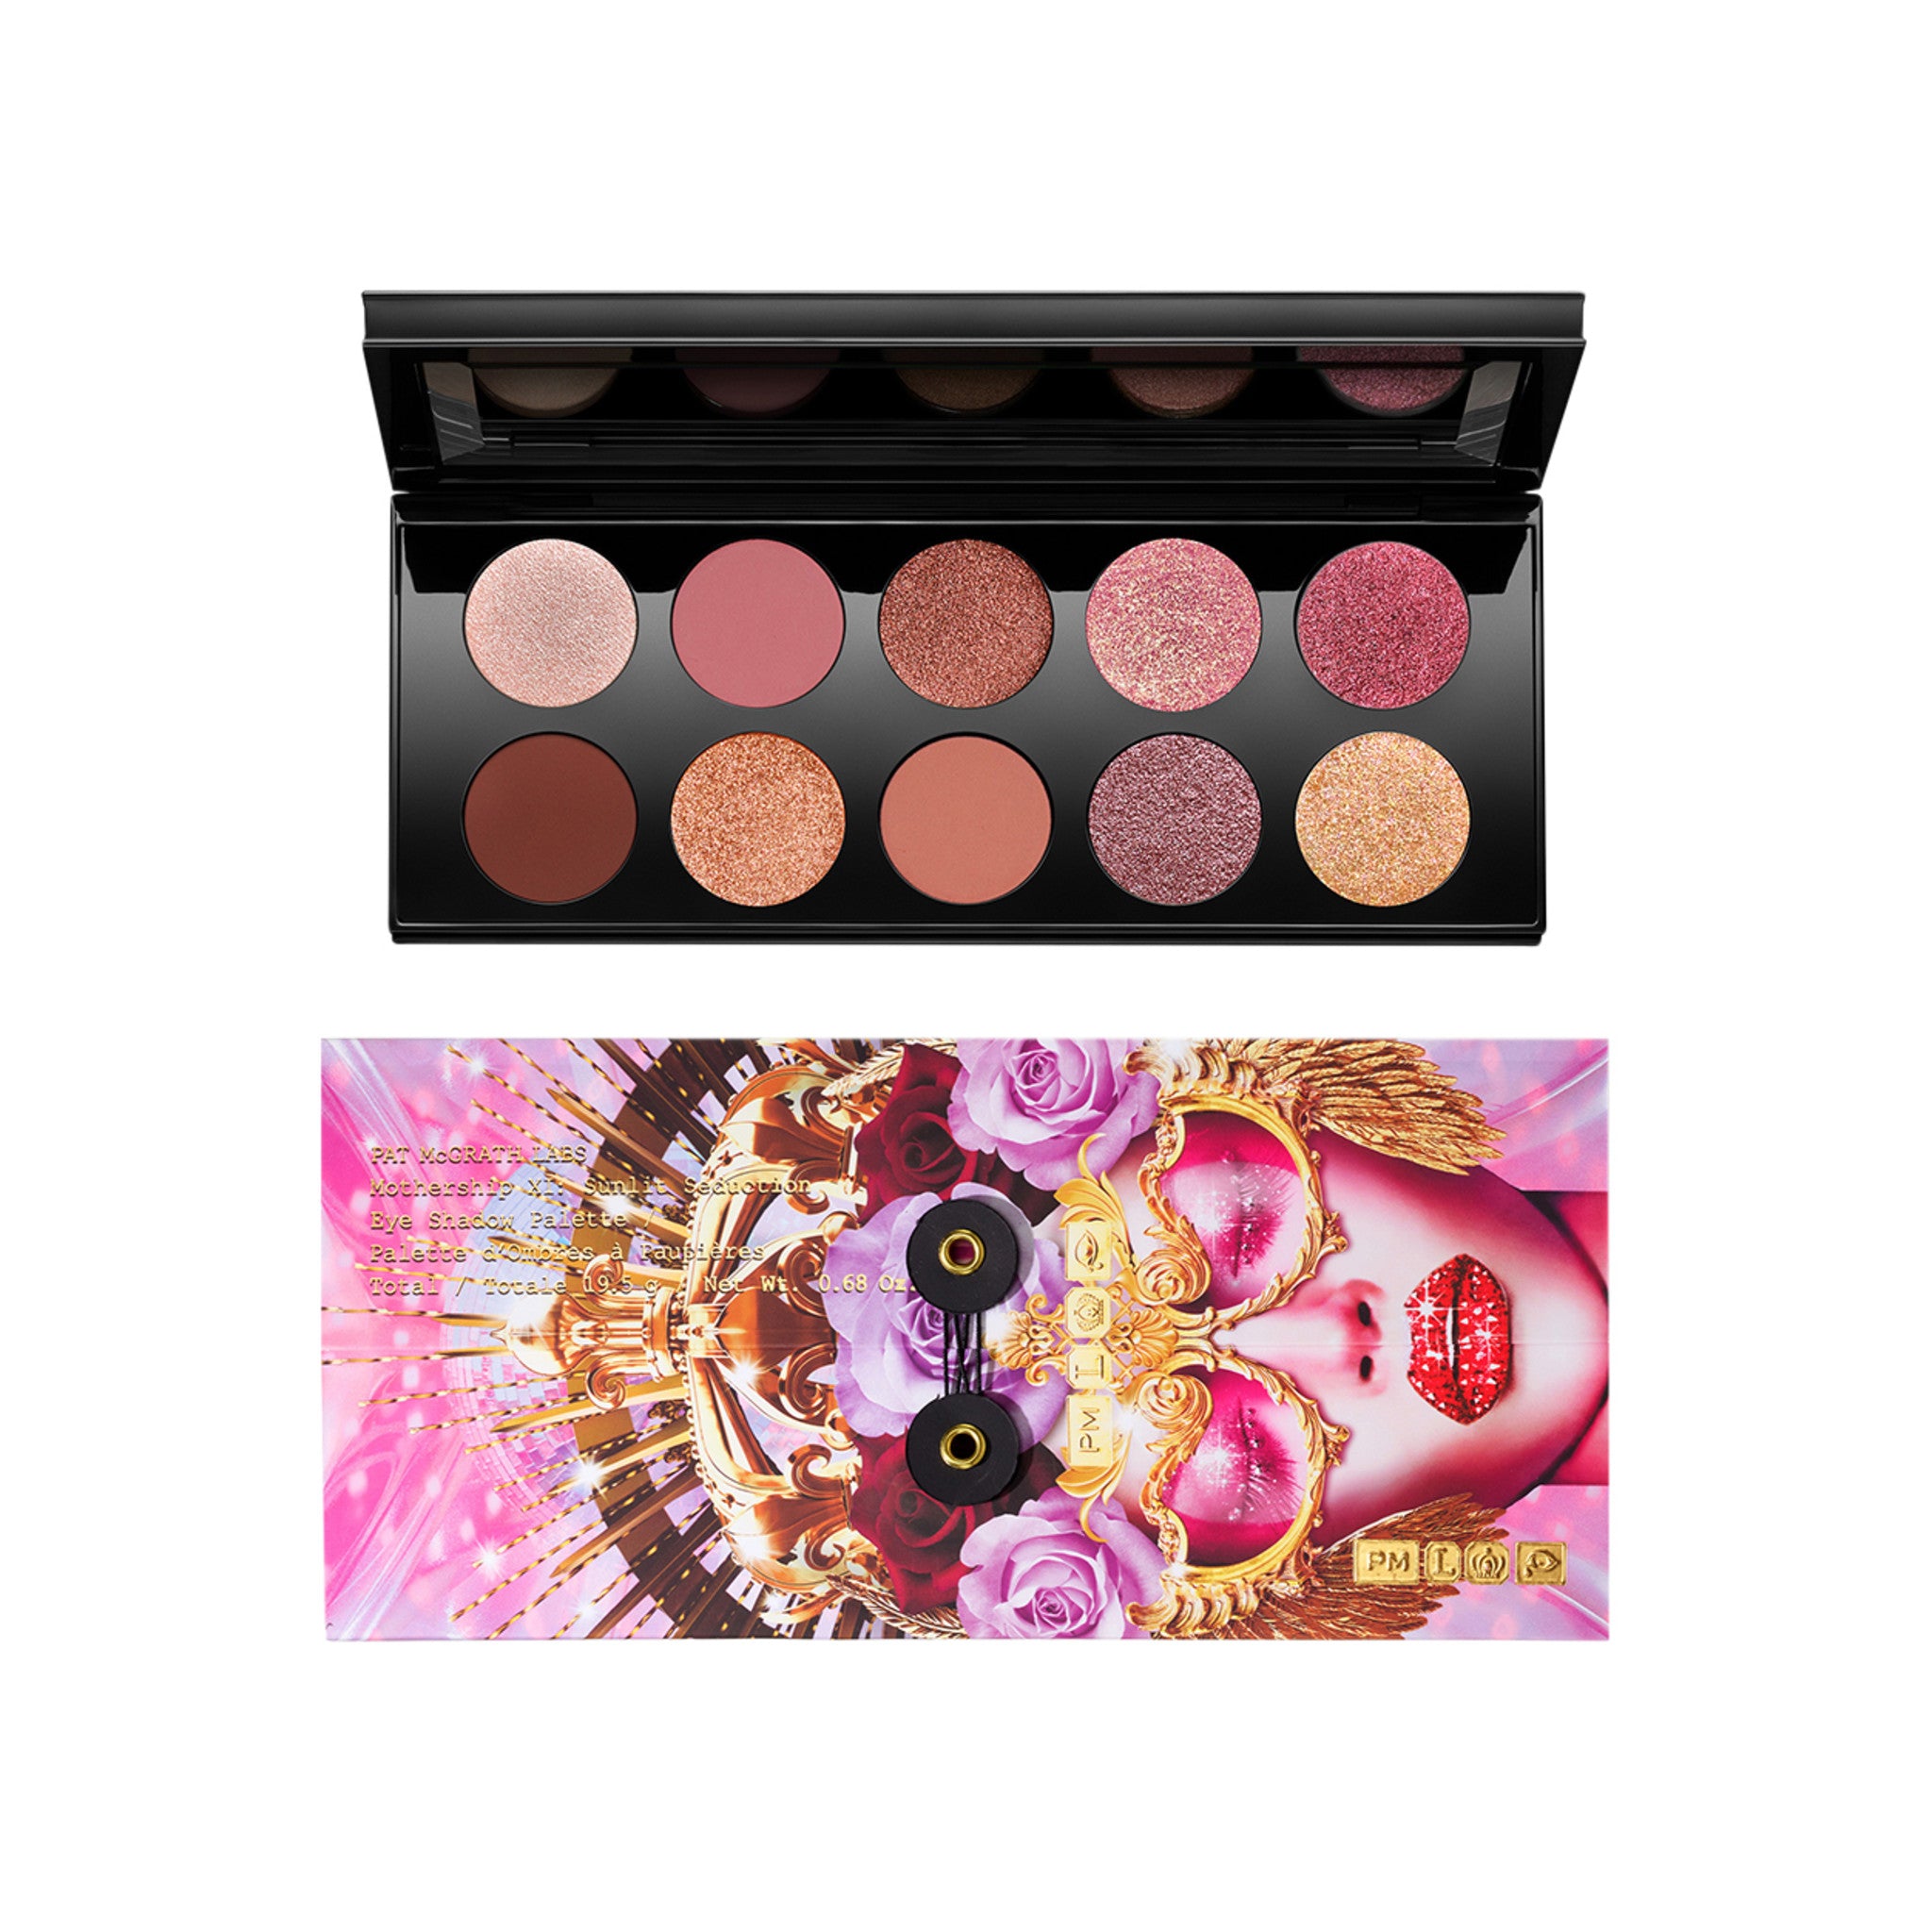 Pat McGrath Labs Mothership XI: Sunlit Seduction main image. This product is in the color multi